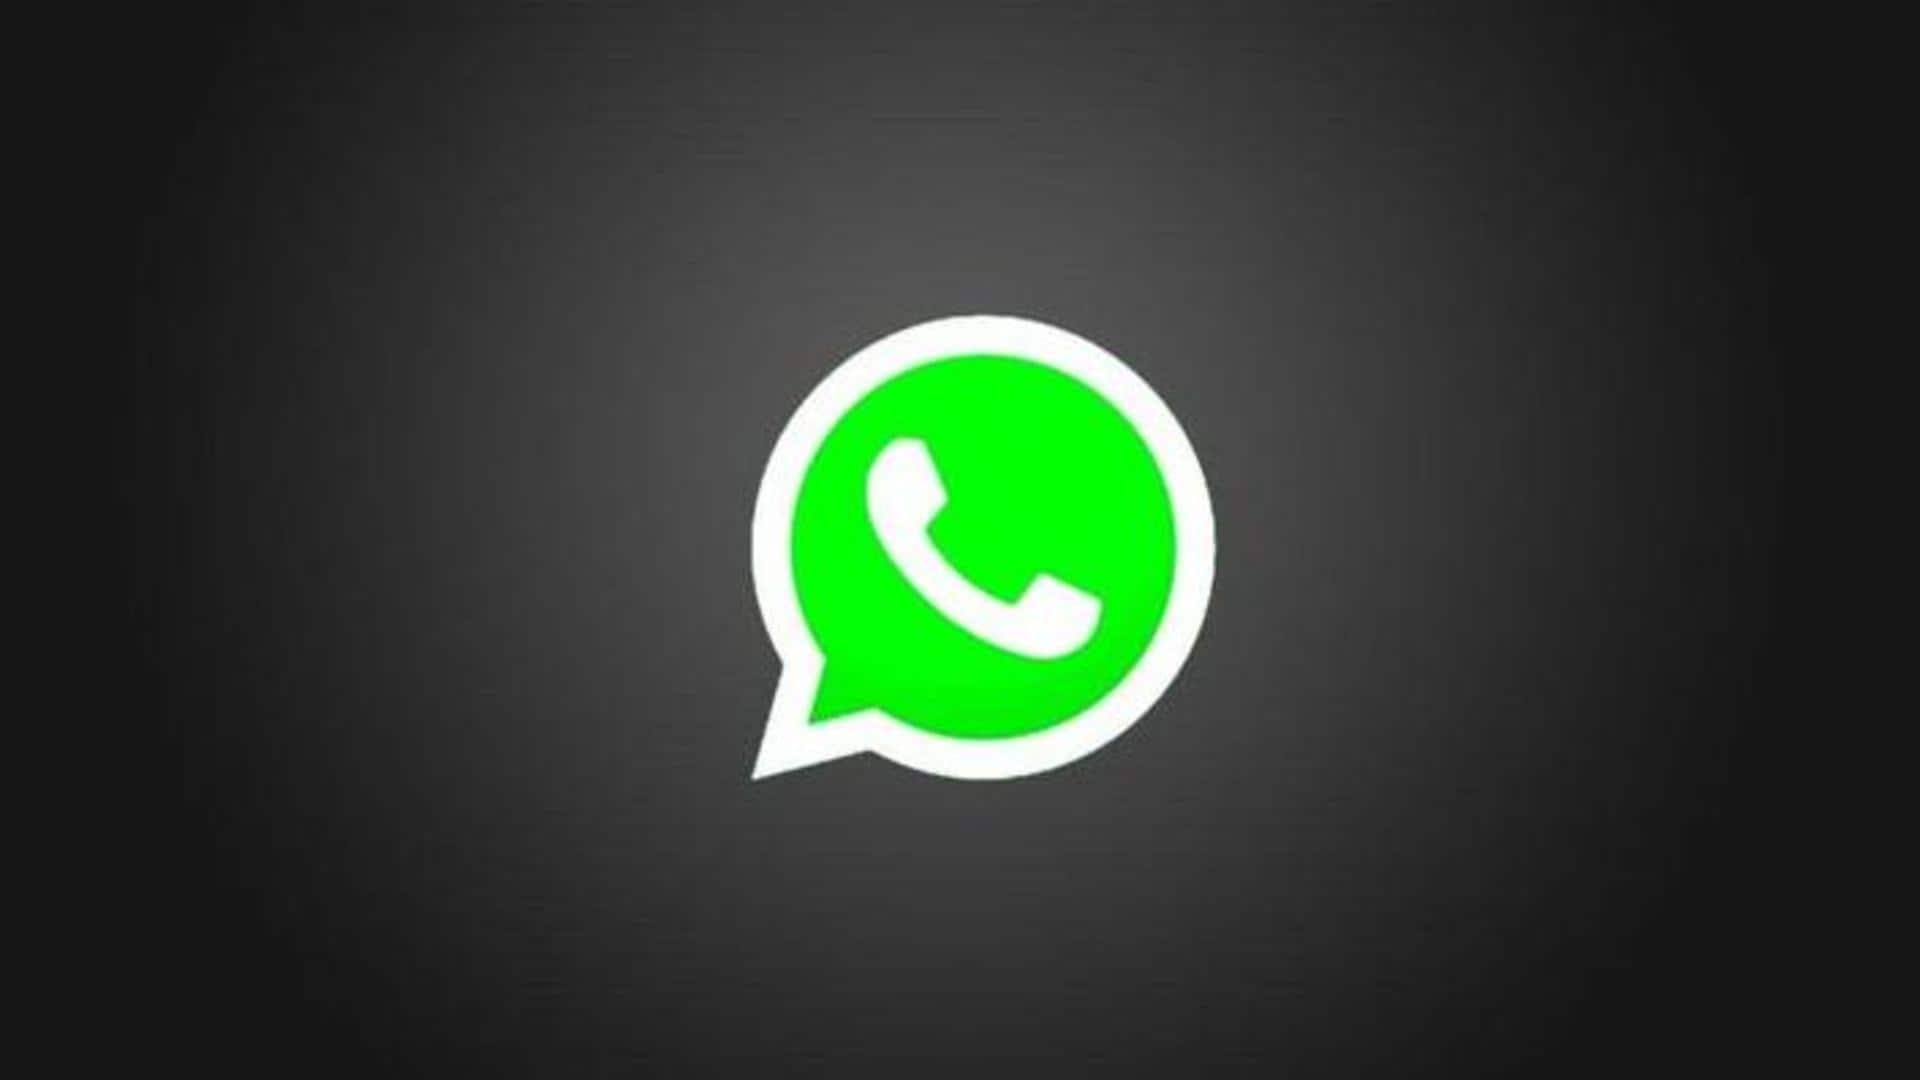 WhatsApp is readying these new features for Android and iOS